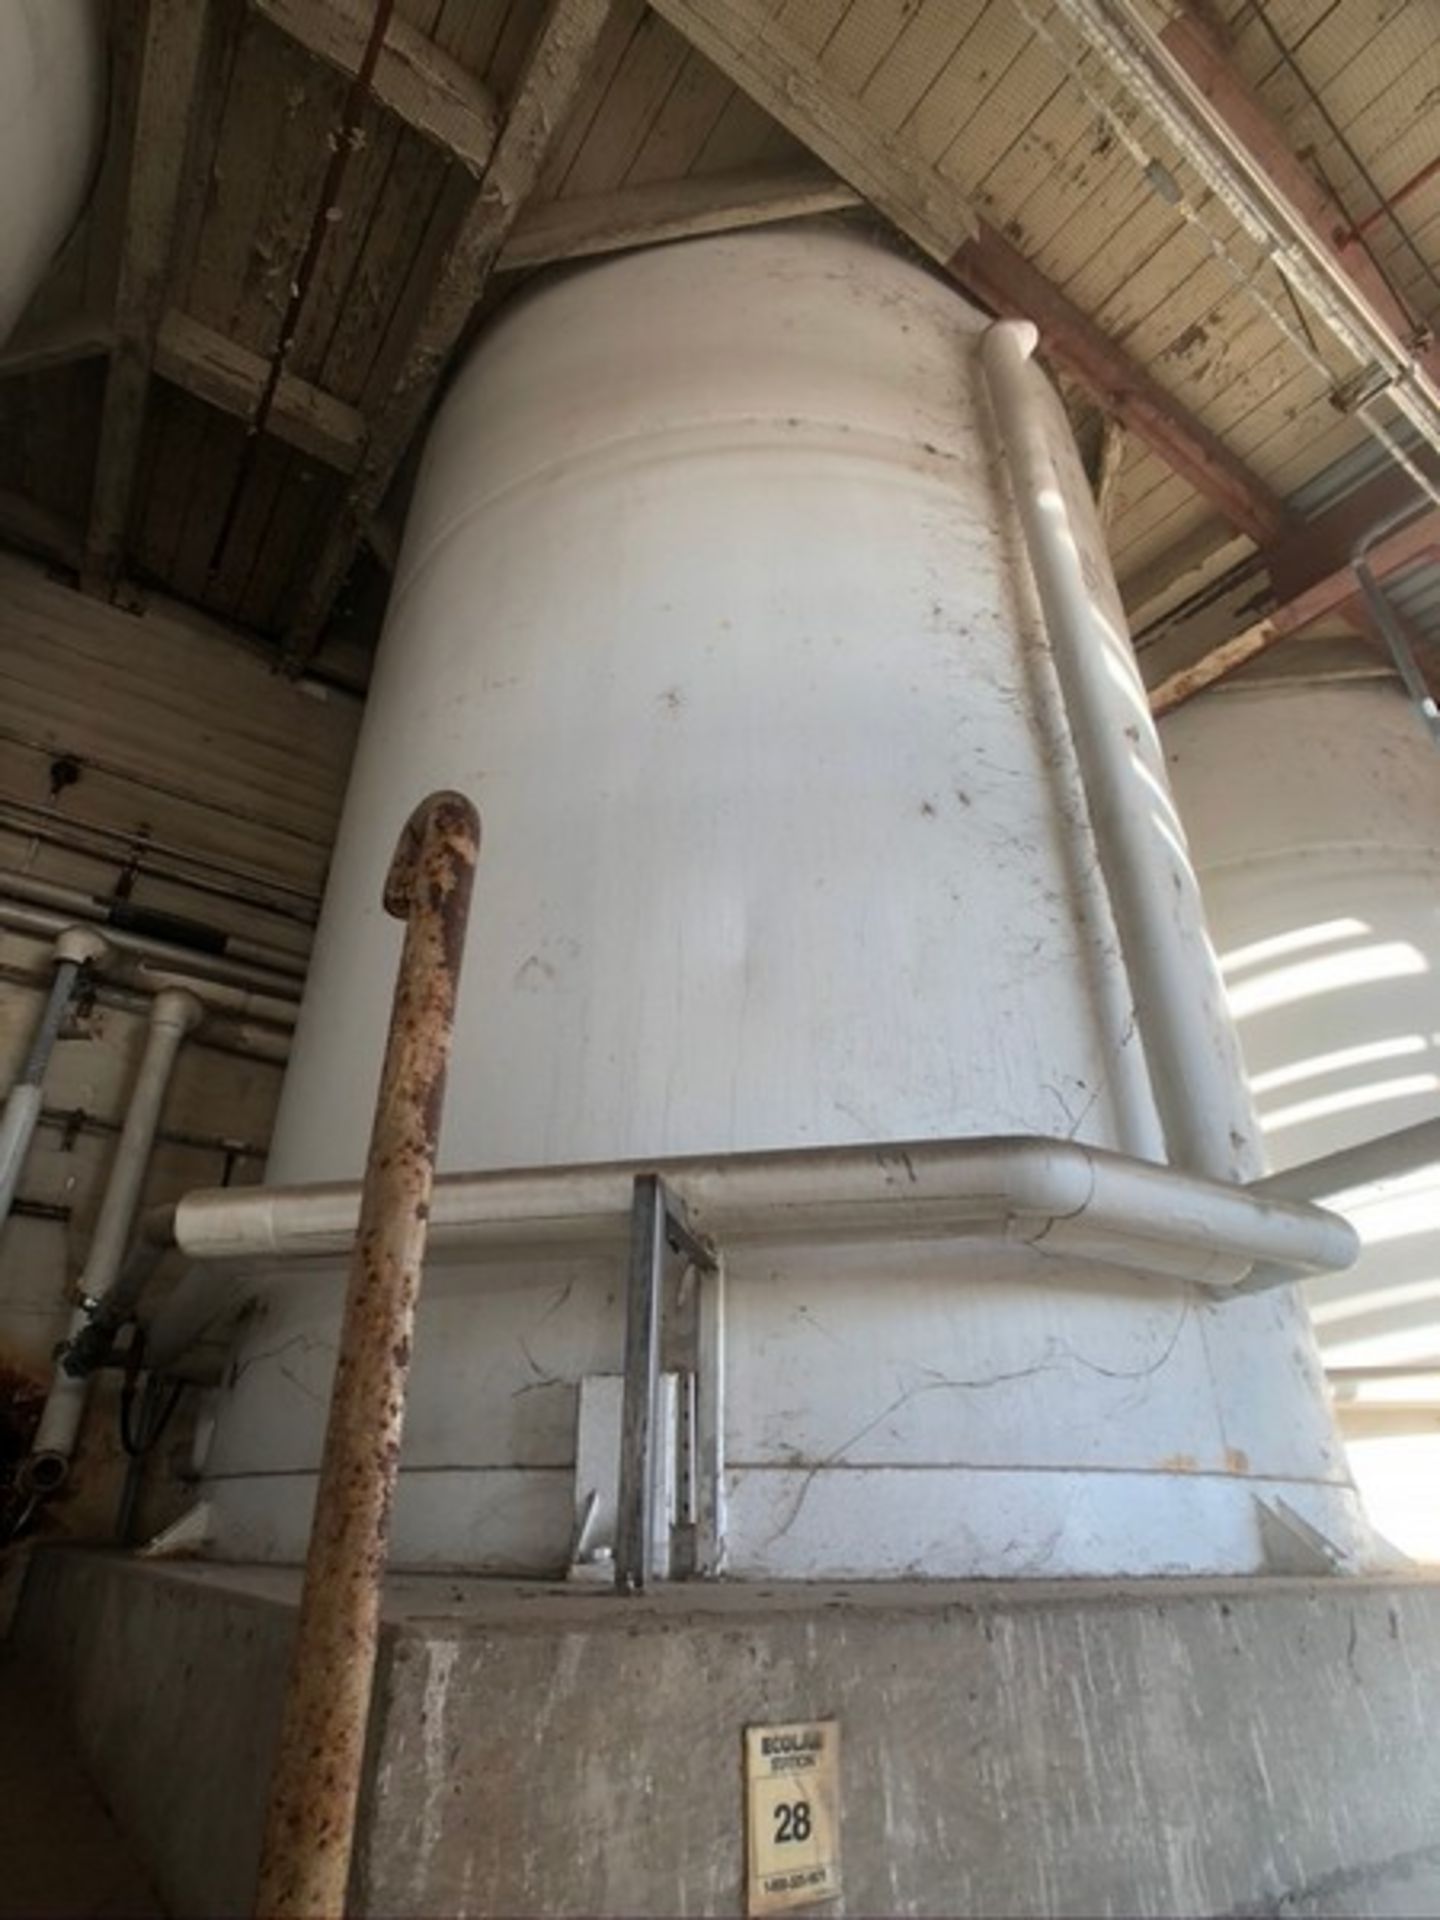 CHERRY BURRELL APPX. 15,000 GALLON JACKETED SILO, EQUIPPED WITH VERTICAL AGITATION, WCB INLET VALVE,